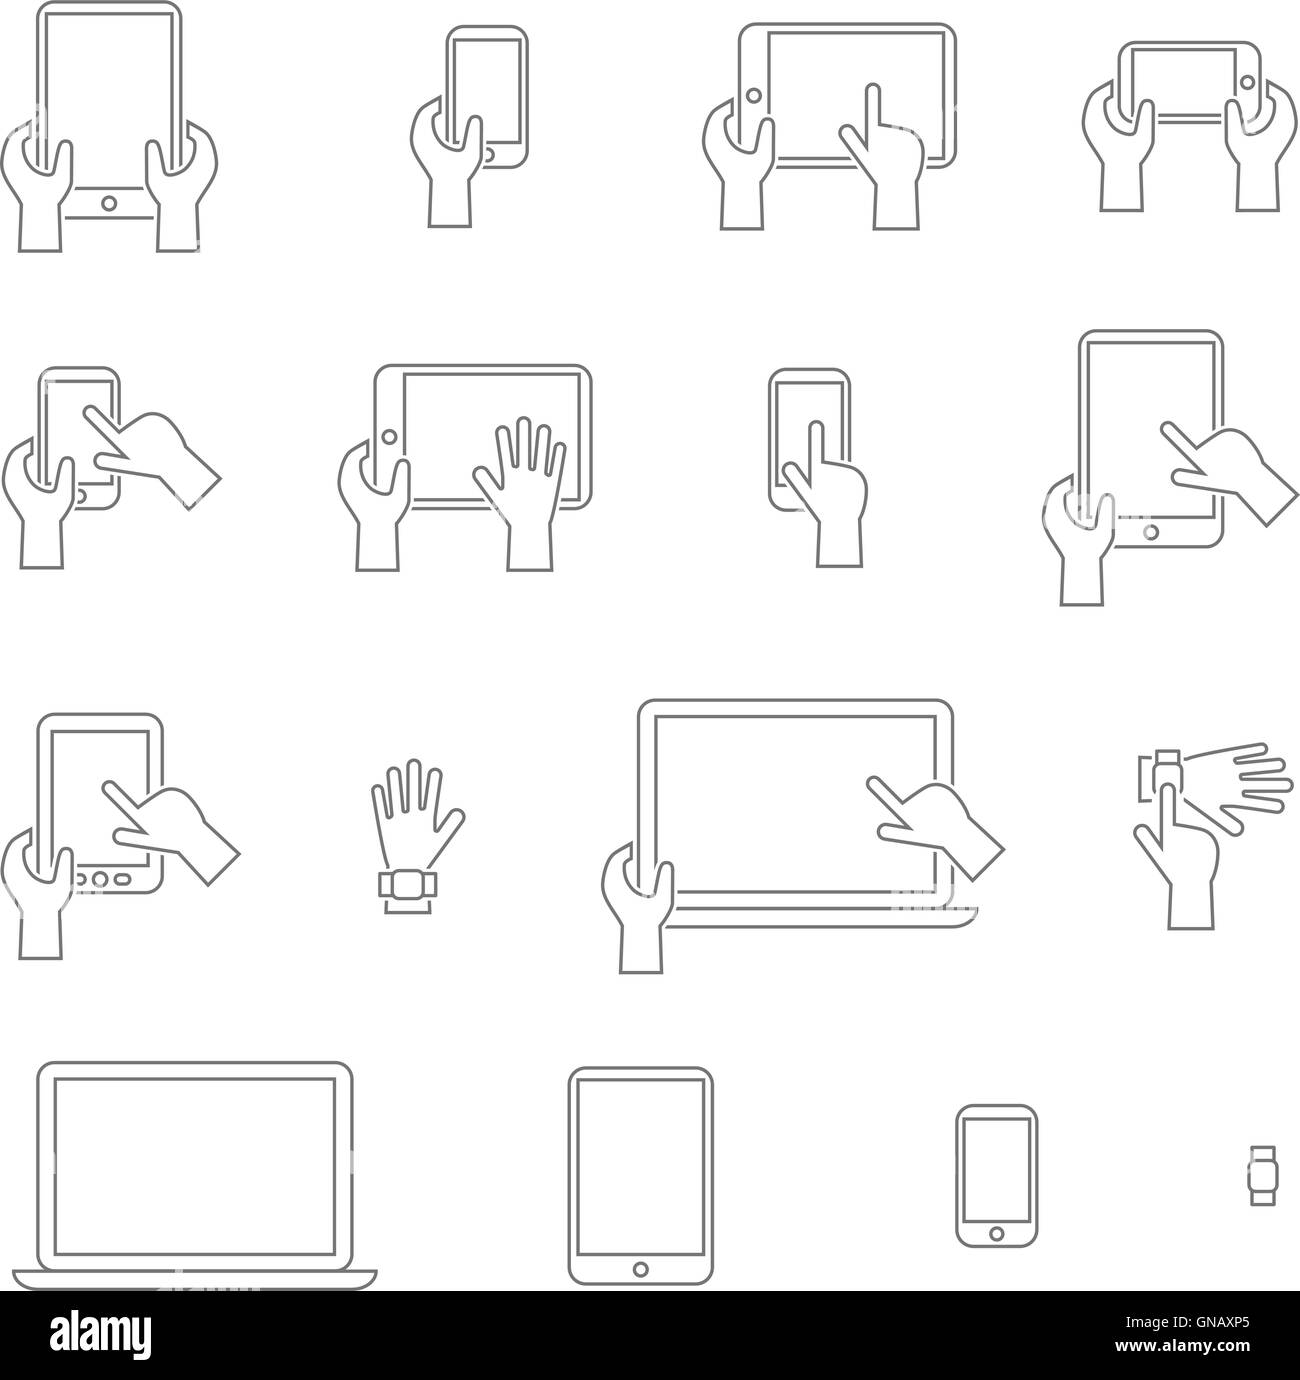 Vector icons set gadgets with touch screen. Stock Vector